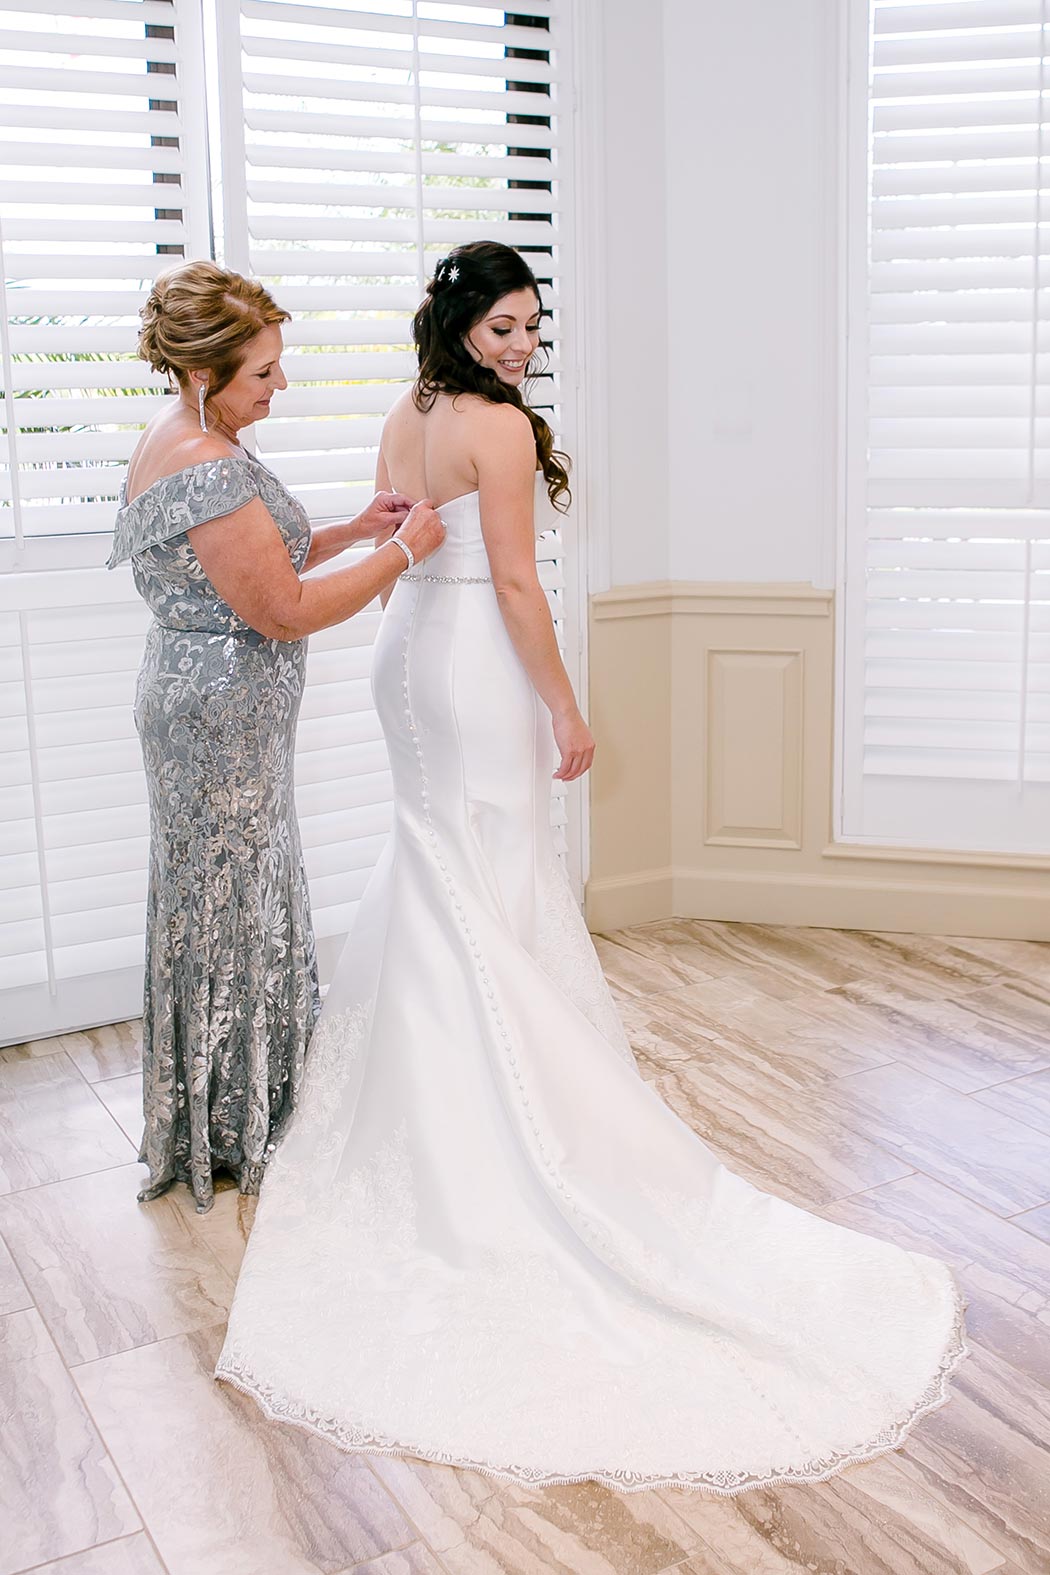 mom helping daughter getting into her bridal dress | mom fastening buttons on daughters bridal dress